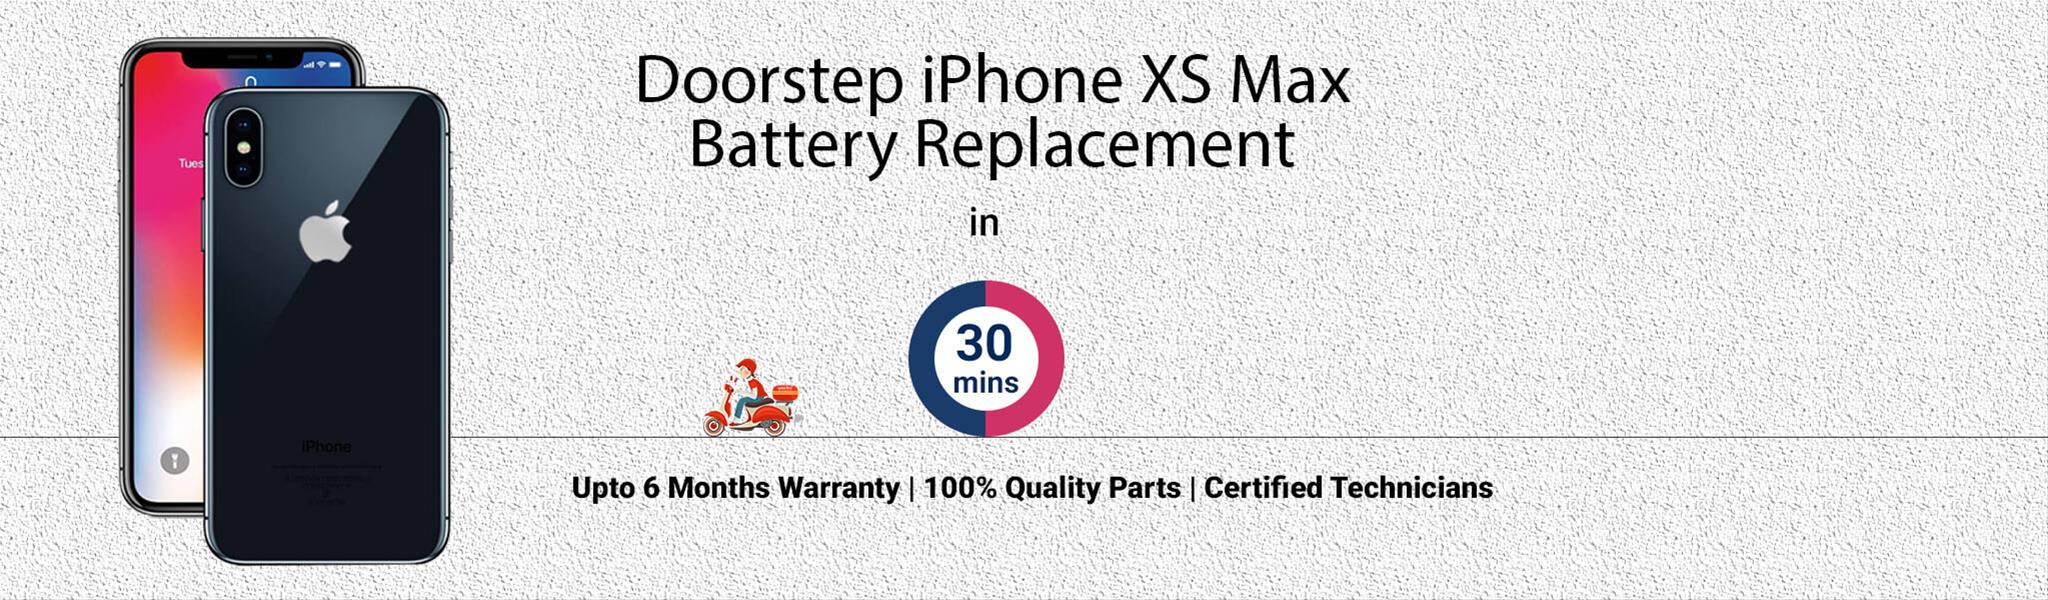 iphone-xs-max-battery-replacement.jpg